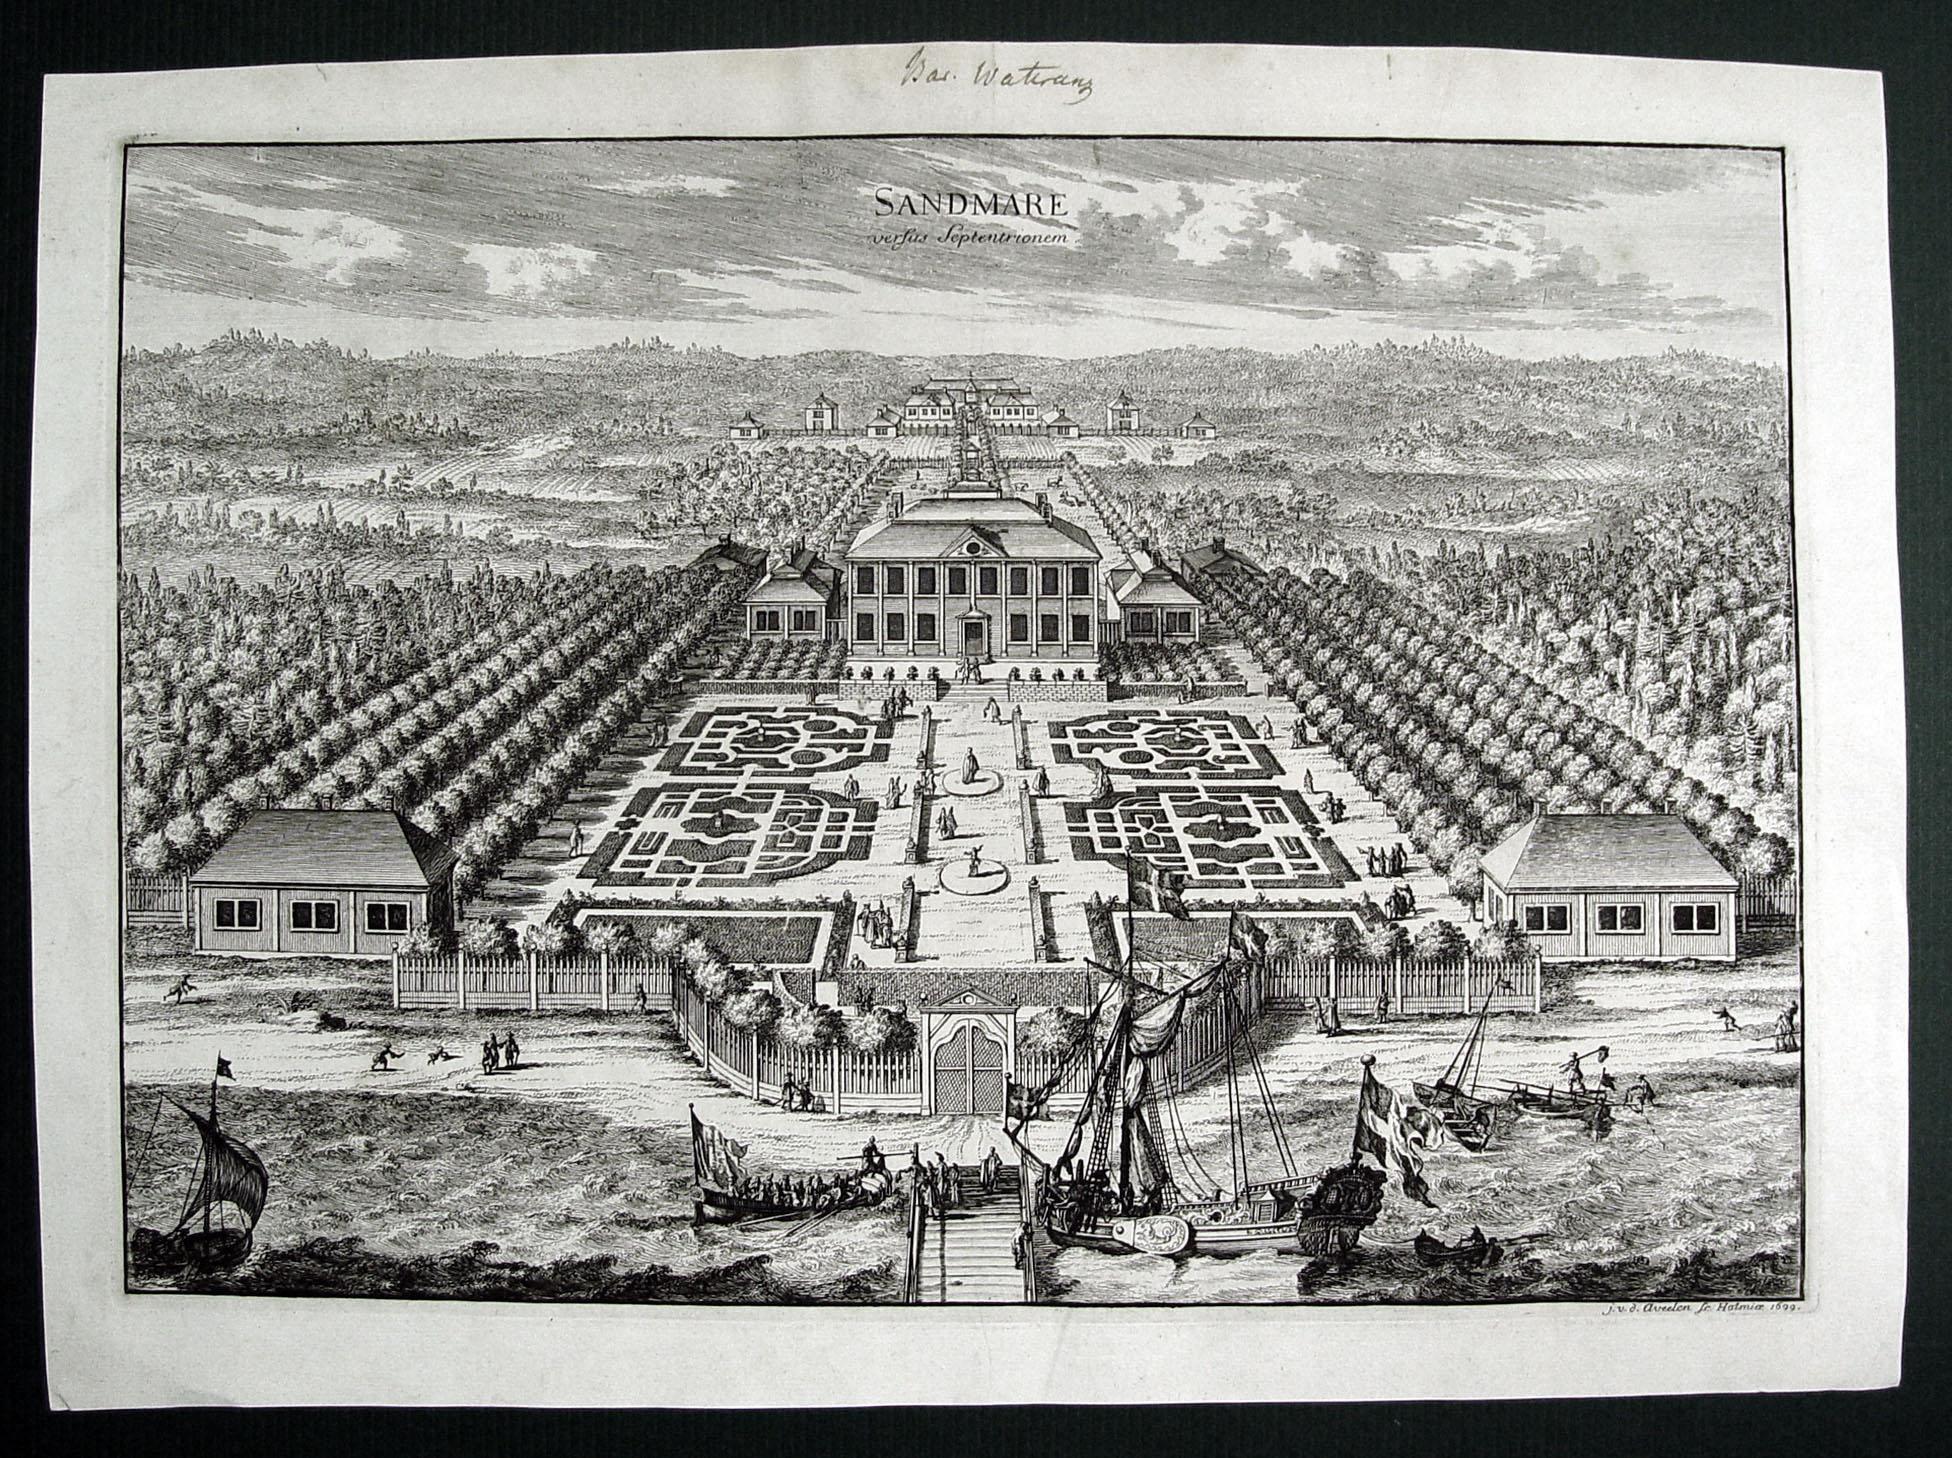 Bird's-eye view engraving of Sandmare Castle and gardens by Johannes van den Aveelen, 1699. Viewed looking from the Baltic Sea harbor, from a large series of engravings collected by Erik Dahlberg of Swedish estates. Unframed. Age toning, ink name